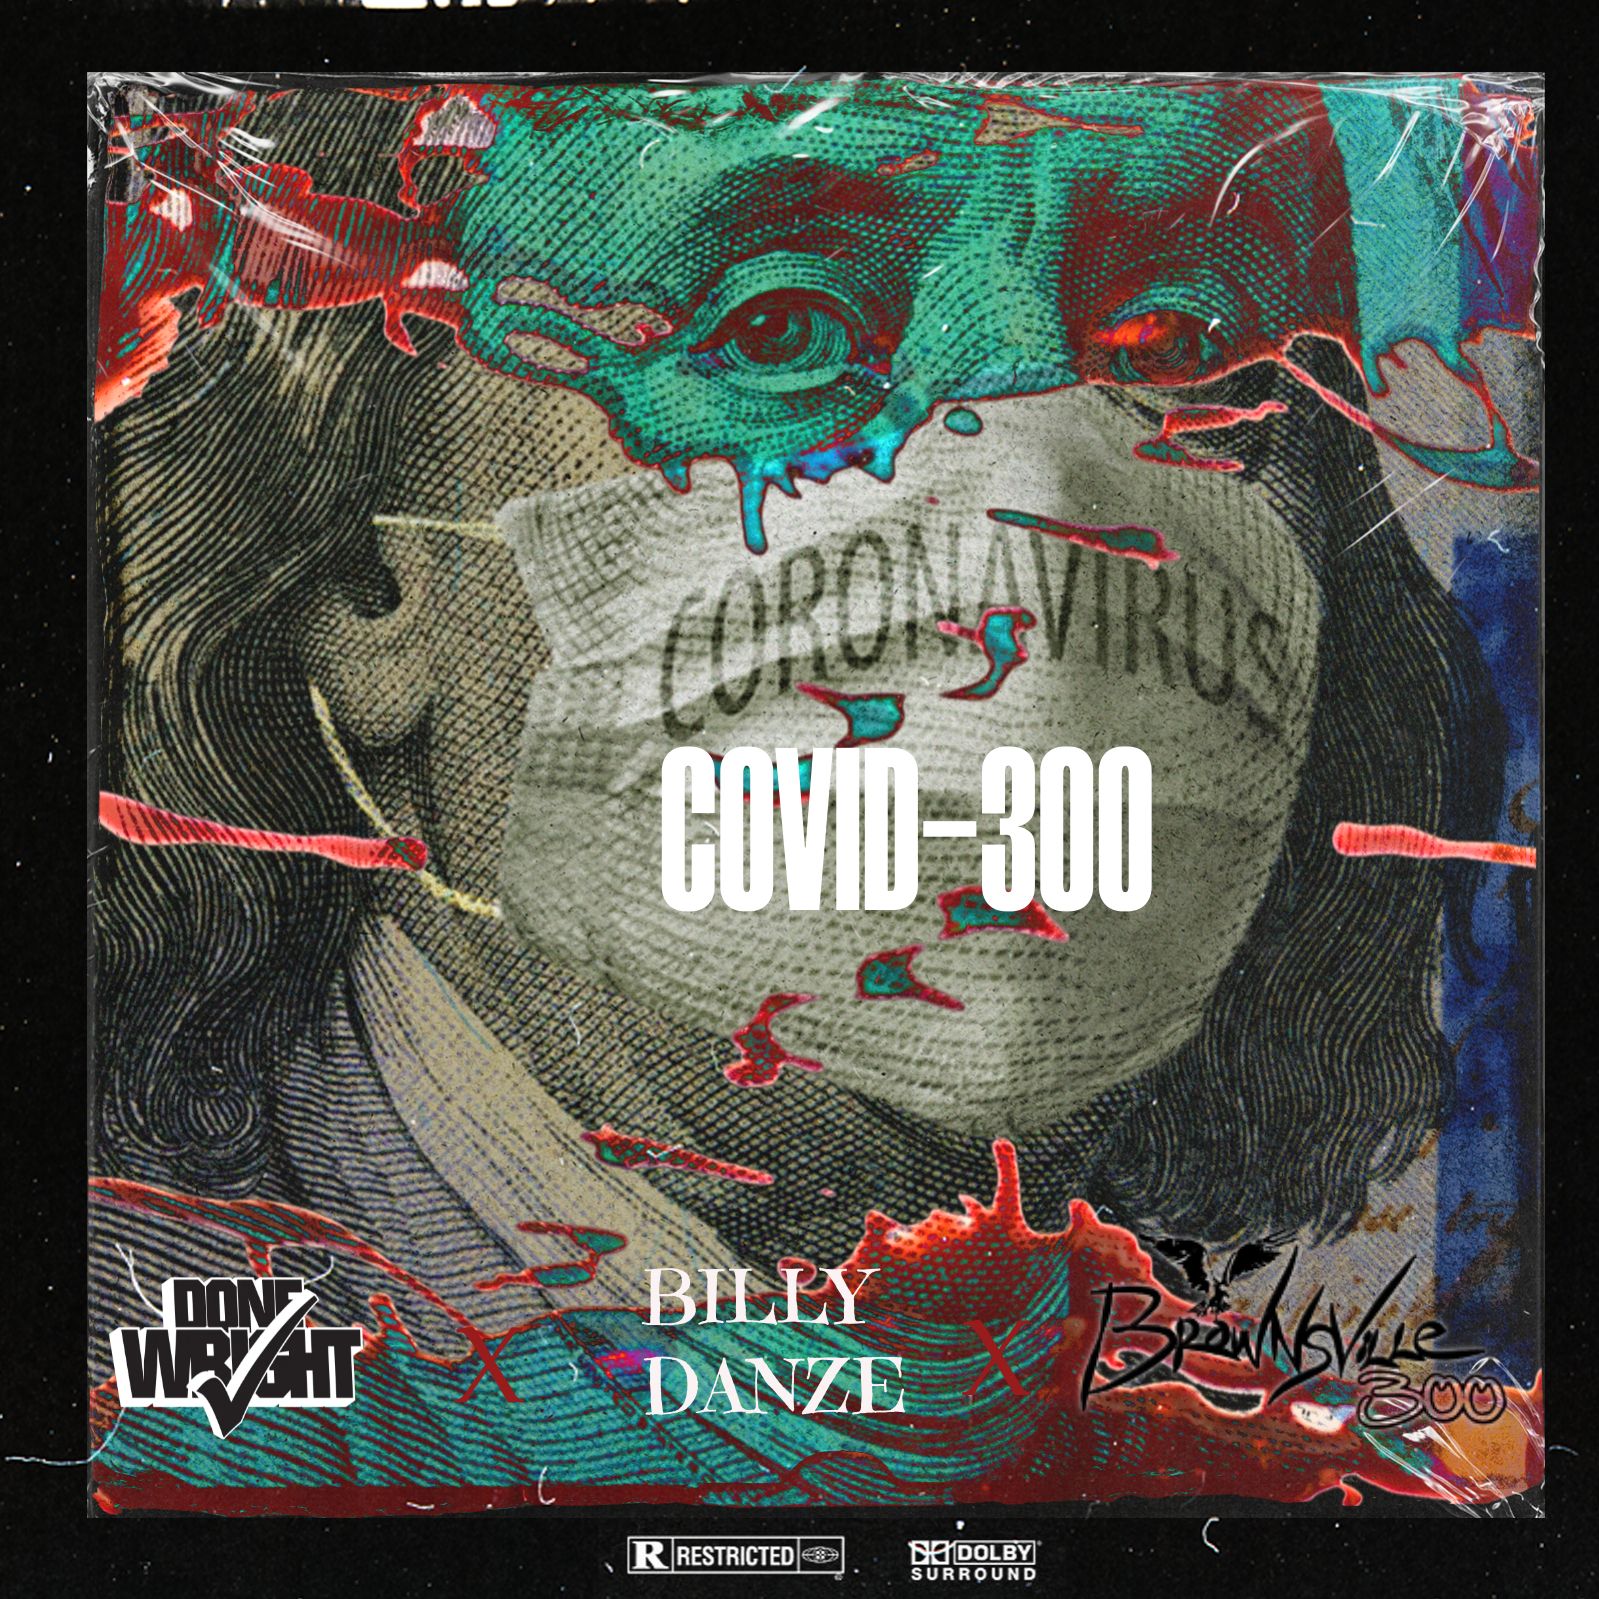 Audio: Done Wright feat. Billy Danze & Brownsville 300 - COVID-300